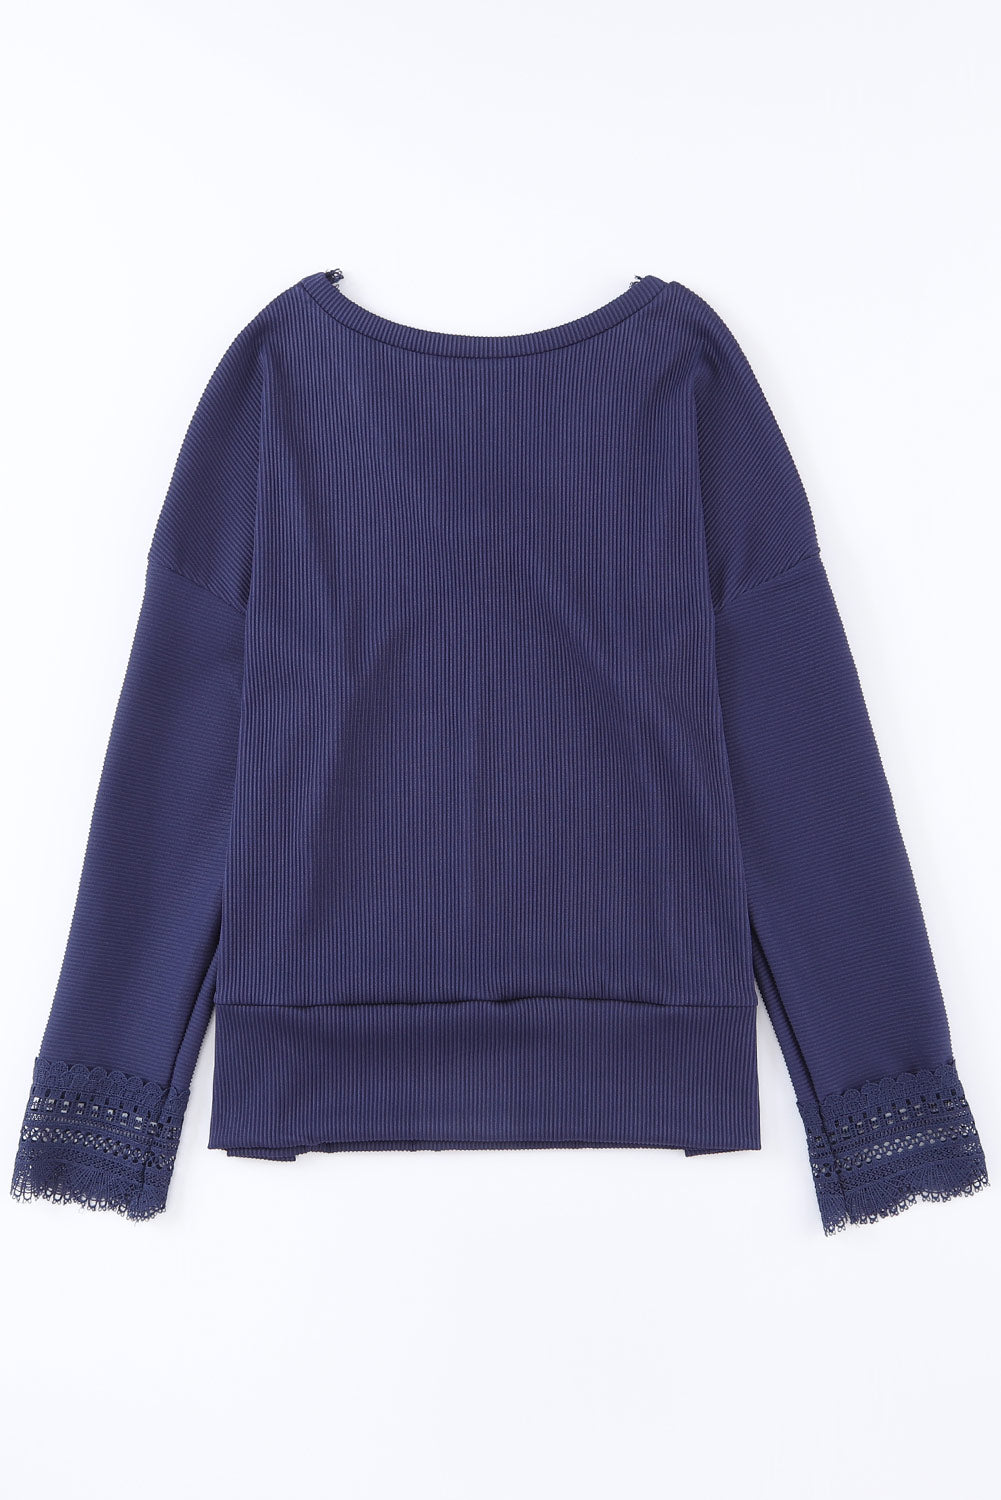 Blue Ribbed Texture Lace Trim V Neck Long Sleeve Top-5